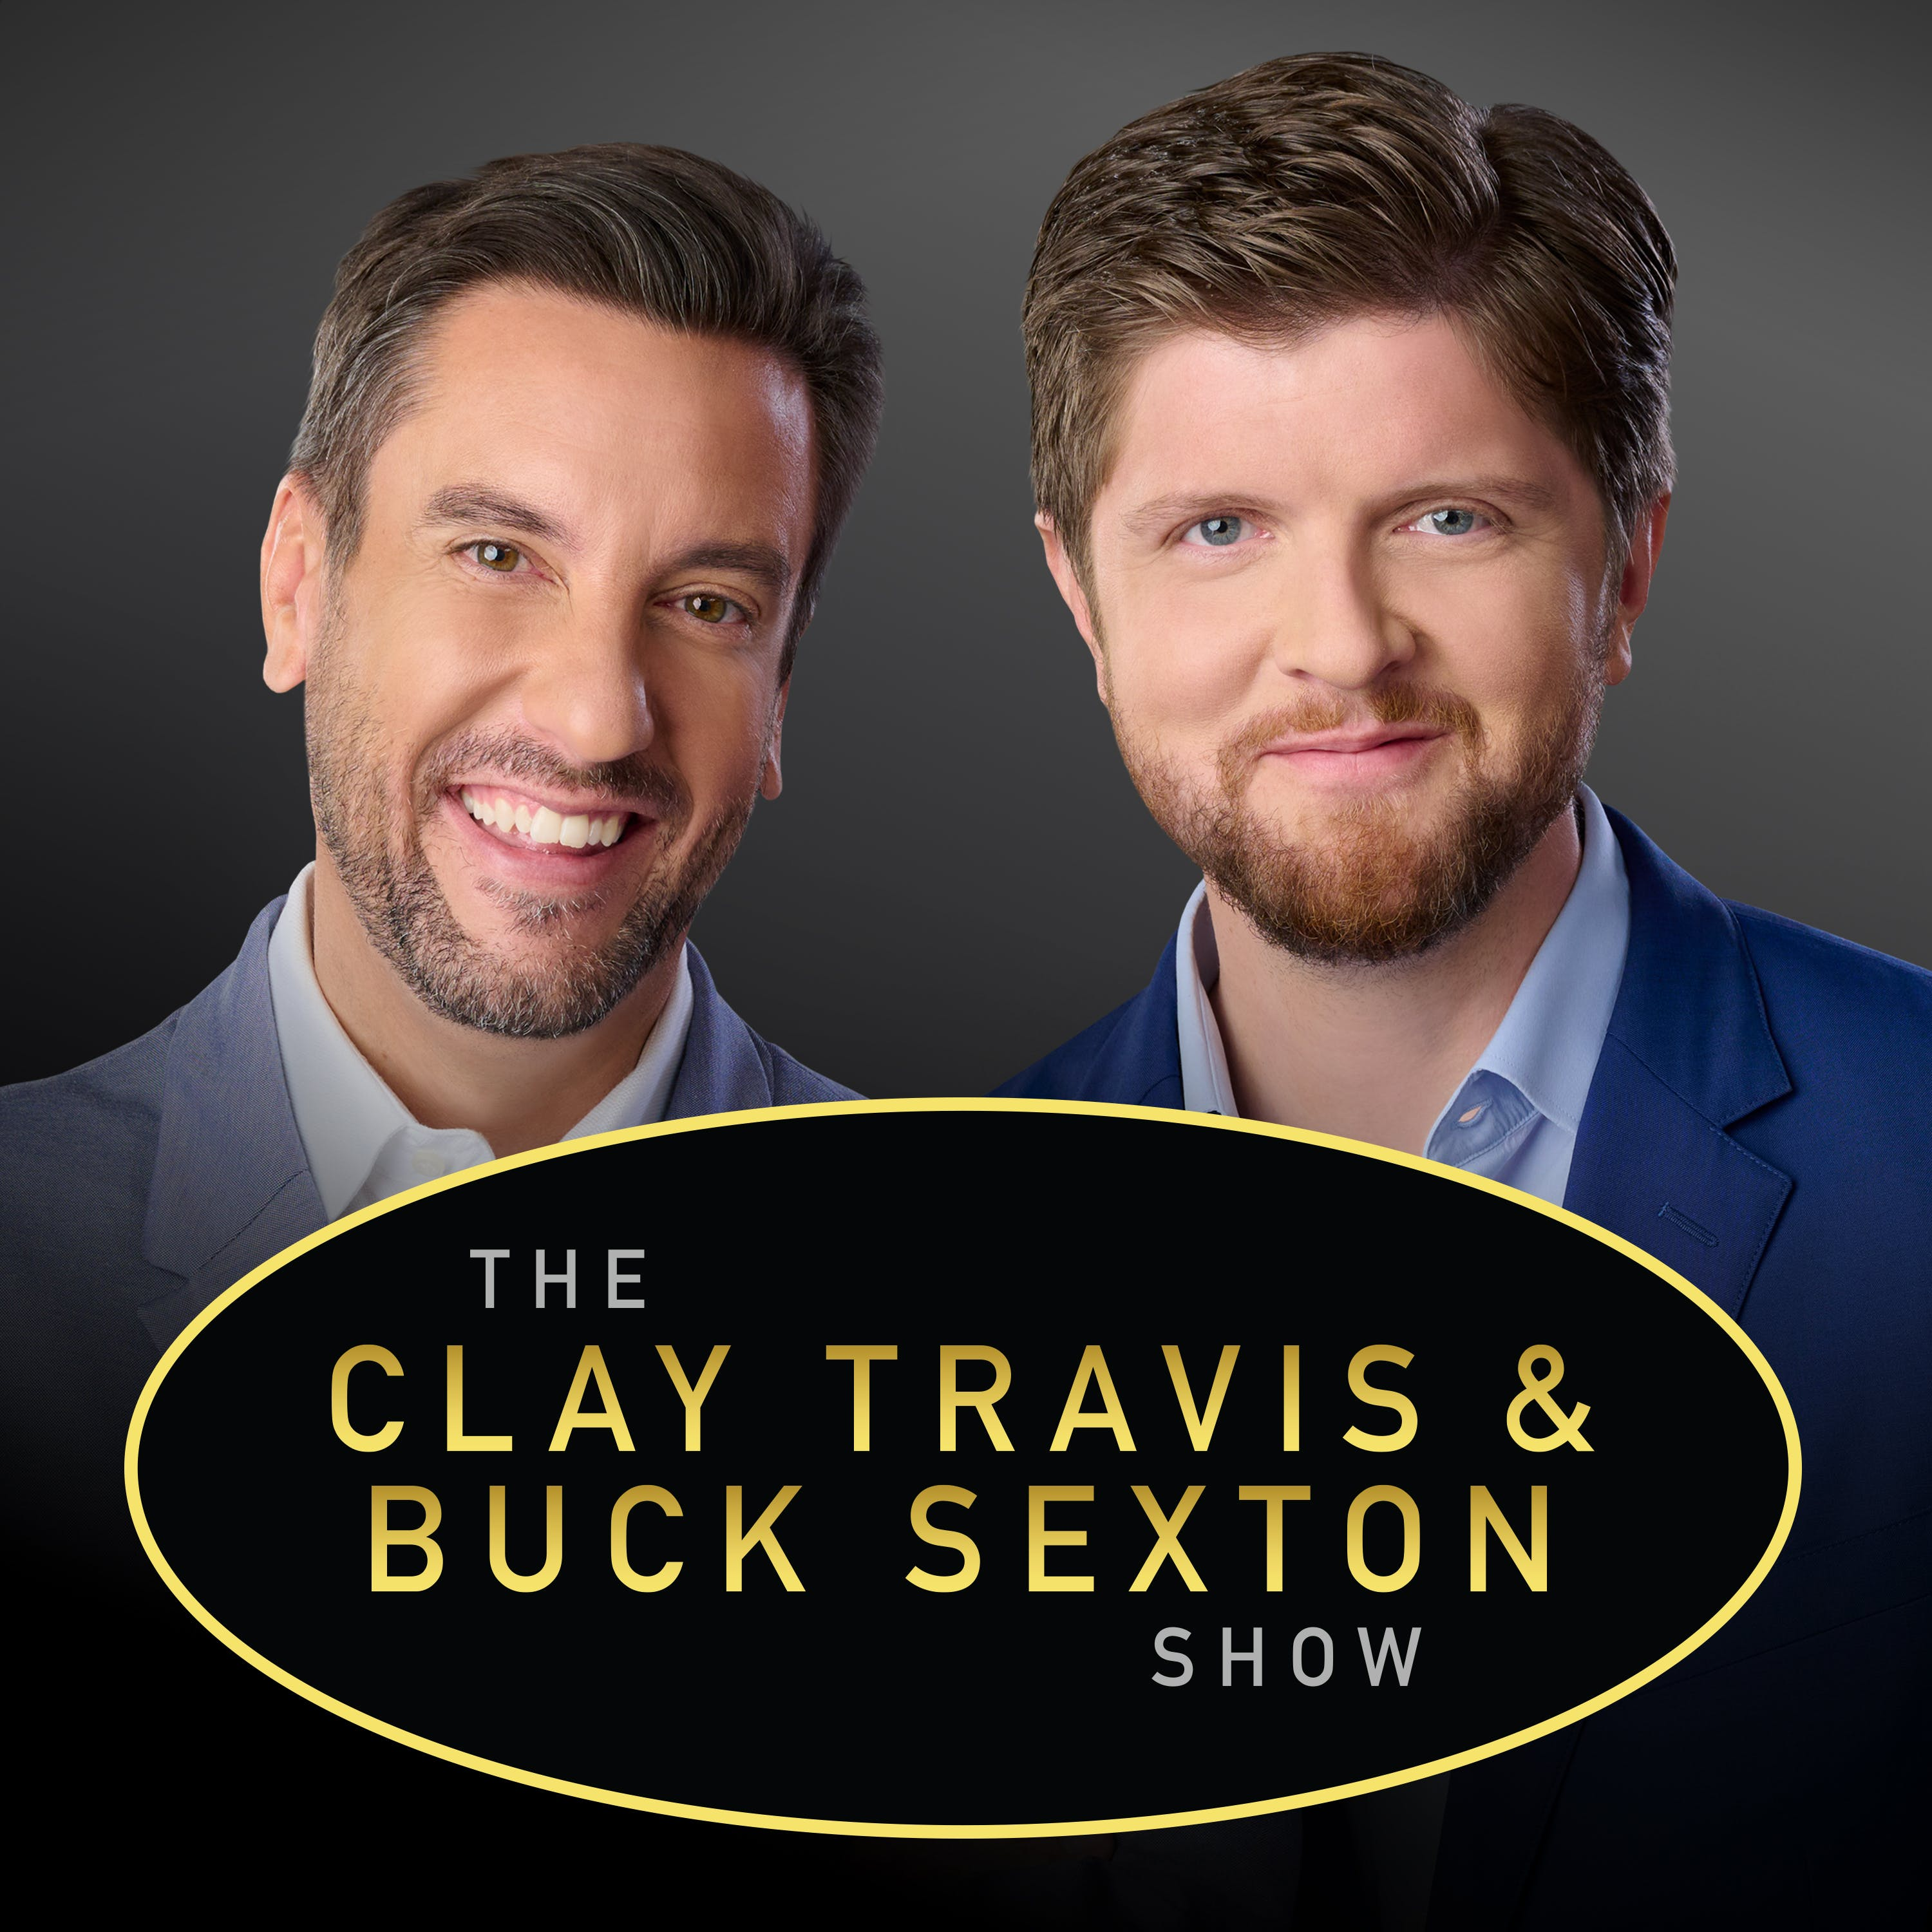 Clay Travis and Buck Sexton Show H2 – Sep 17 2021